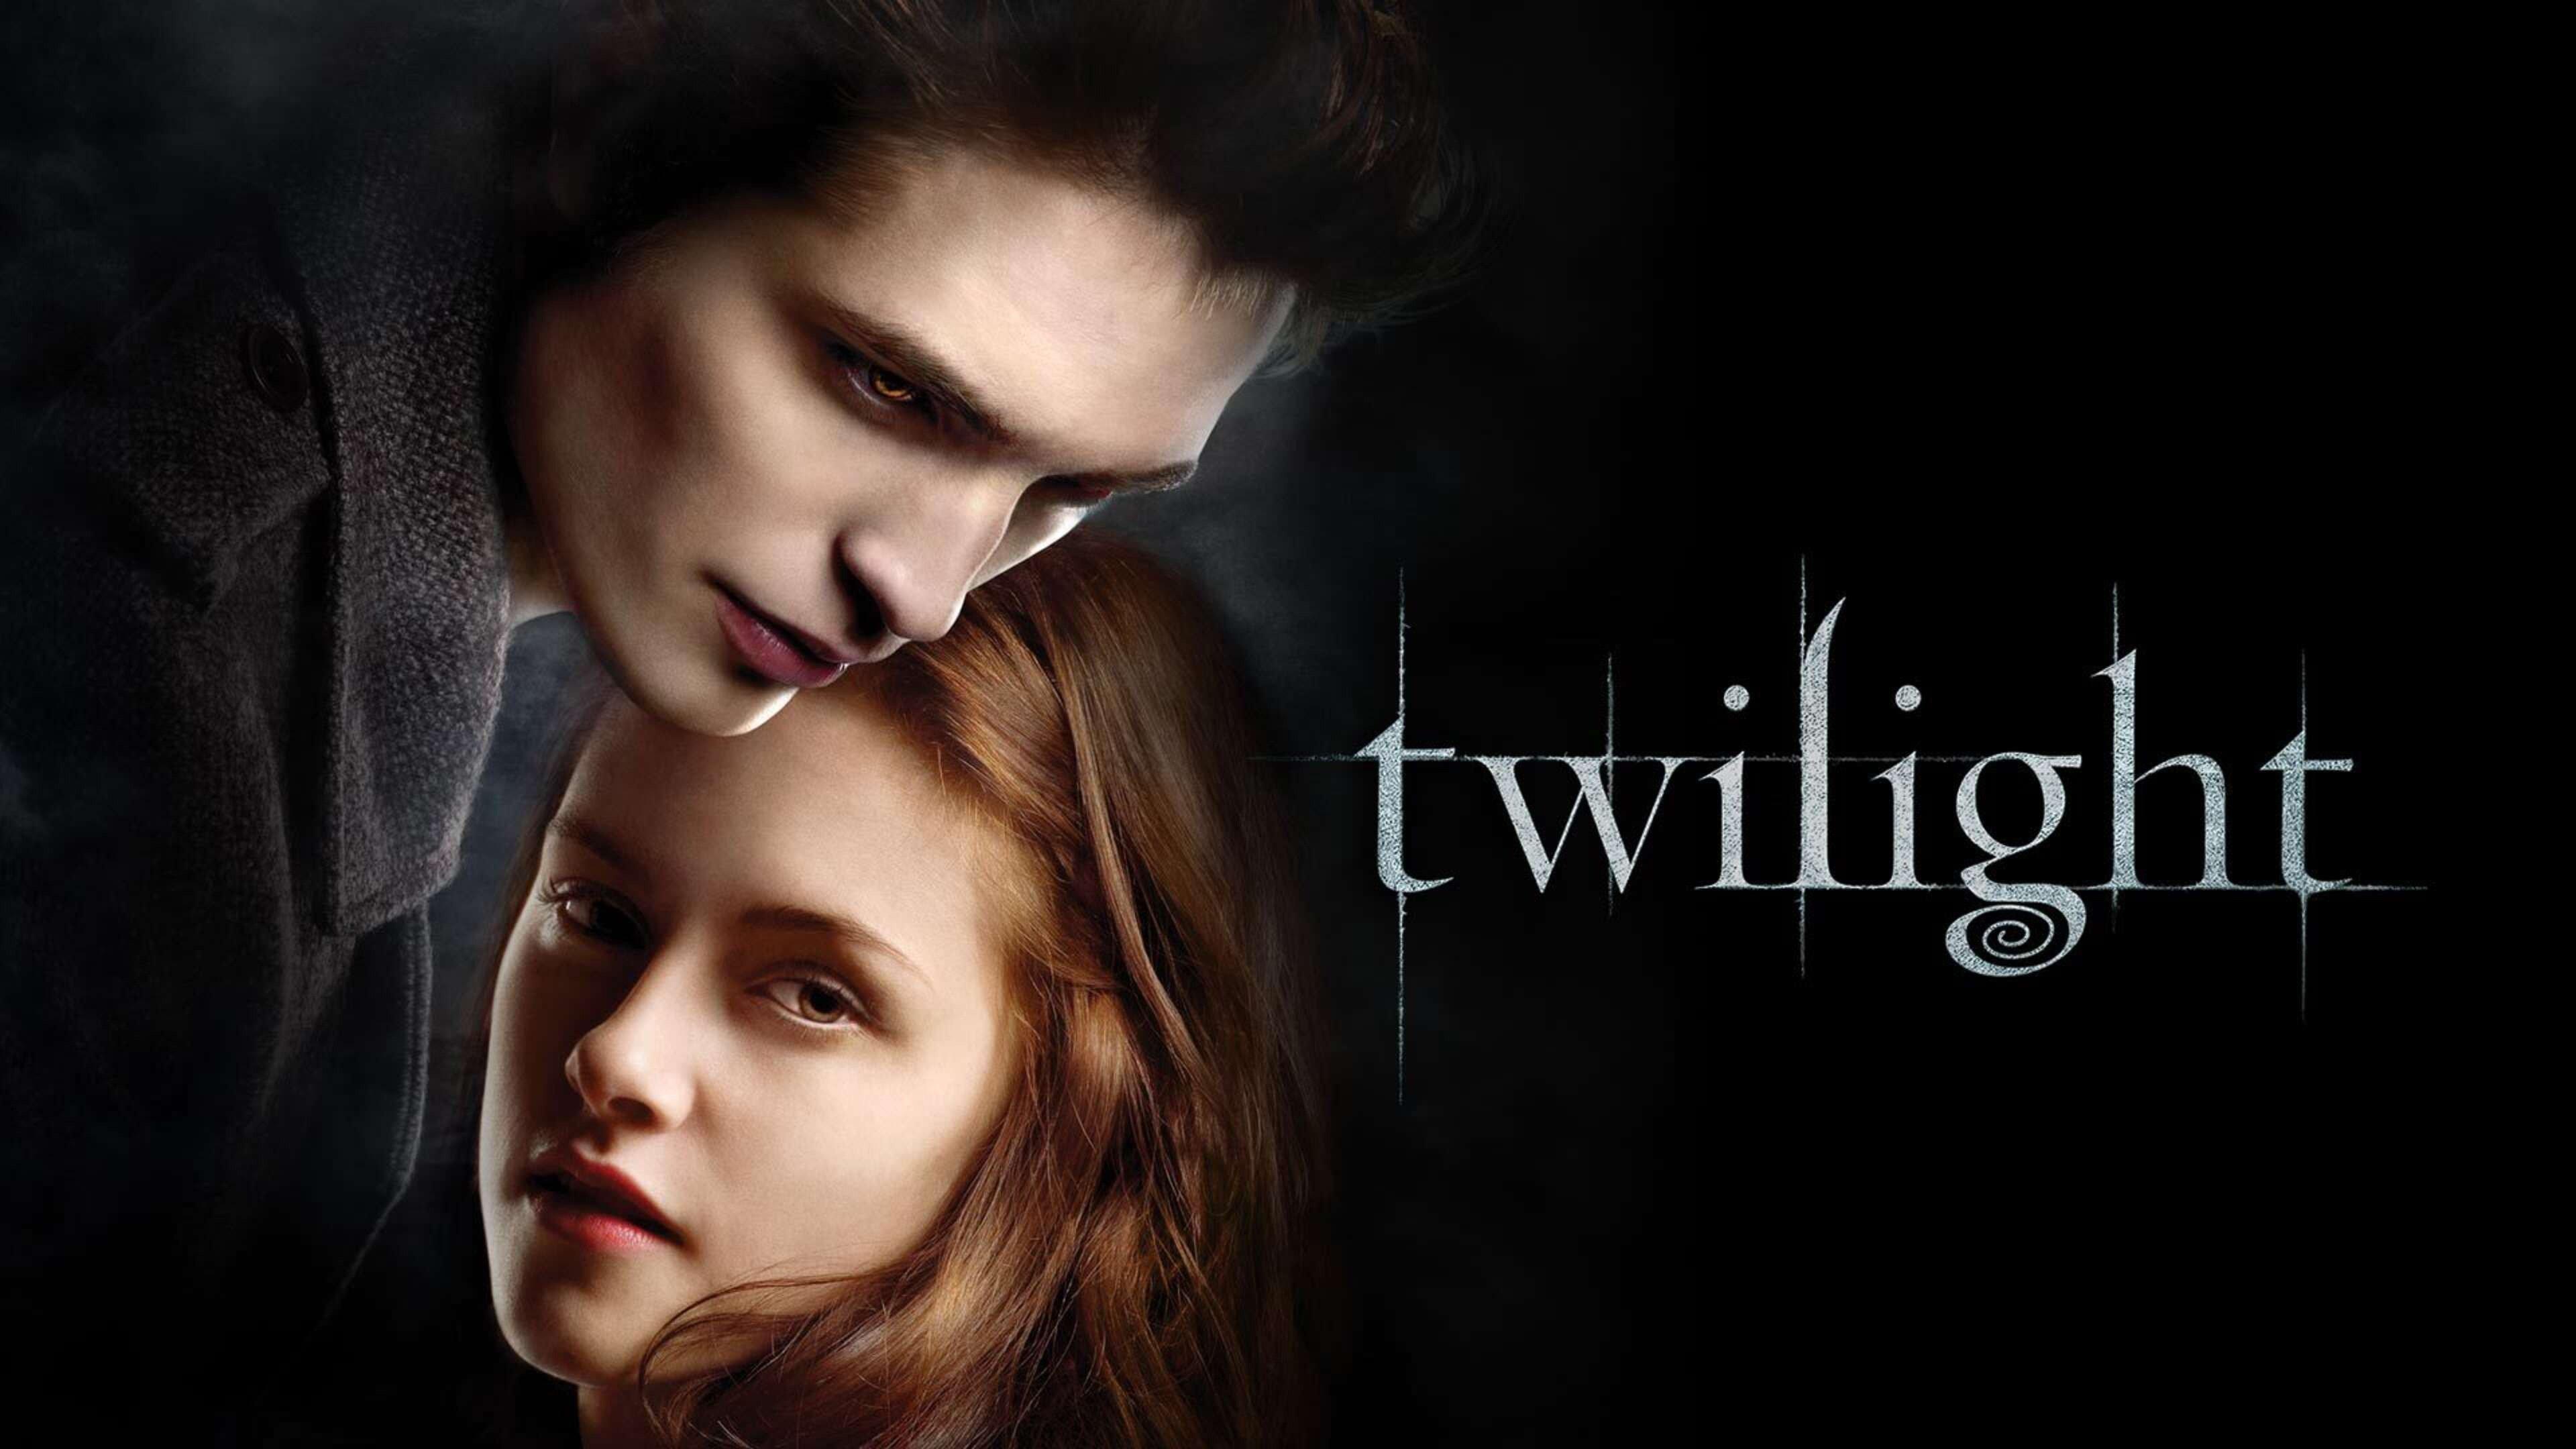 Watch Twilight: Full Movie Streaming Online | Philo (Free Trial)